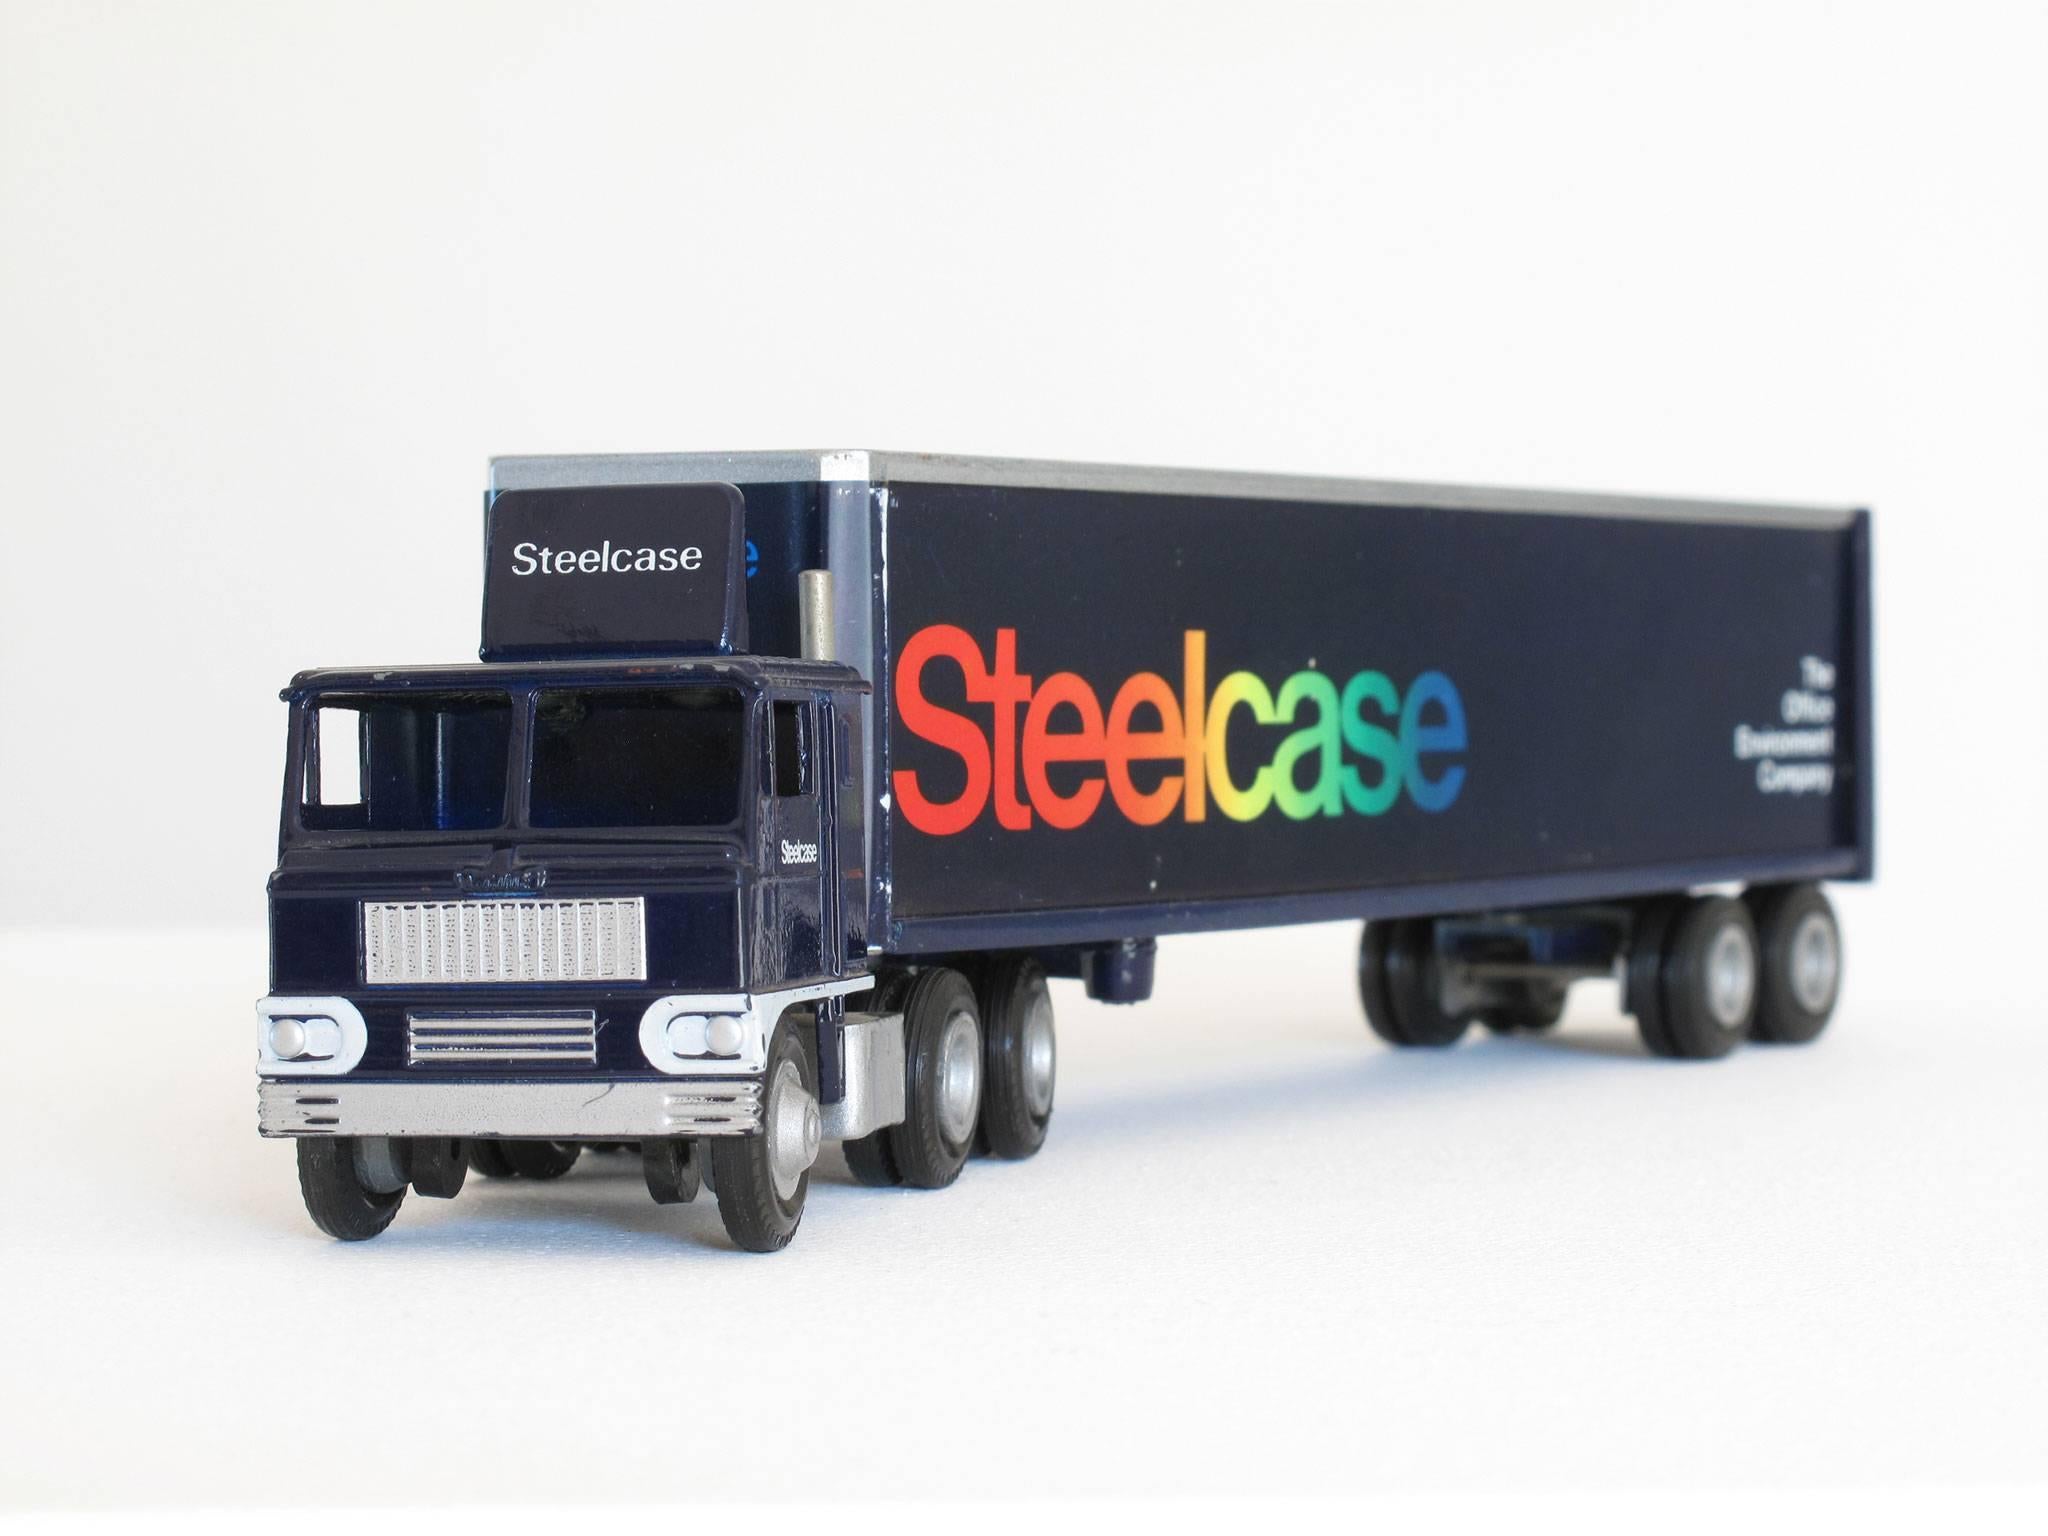 Fun, collectible Steelcase Furniture miniature truck advertising, 1:64 scale model, navy blue semi-truck with cab and trailer and multi-color logos, made of die cast metal, paint, plastic.
Dimensions: 2 3/8 high x 9 1/4 wide x 1 1/2 deep